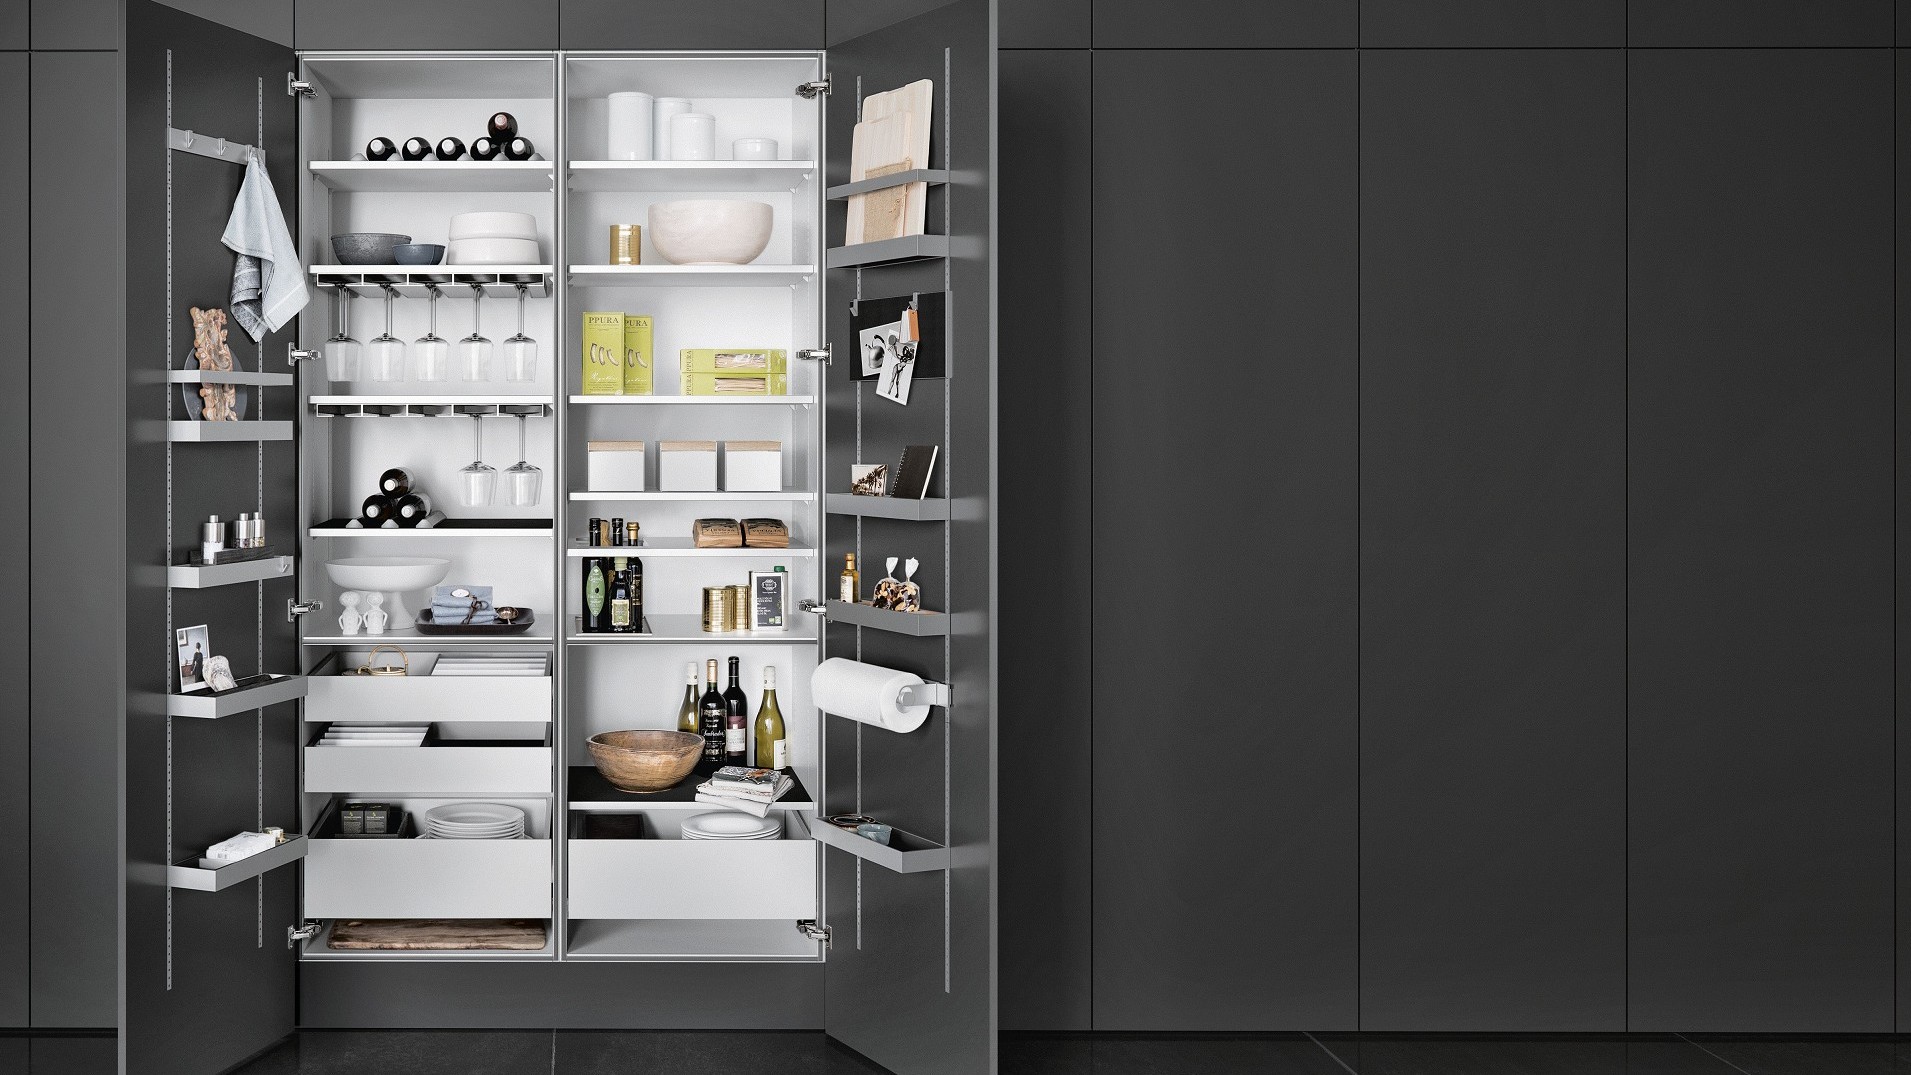 Kitchen Design By Siematic Flexible Planning Options Siematic